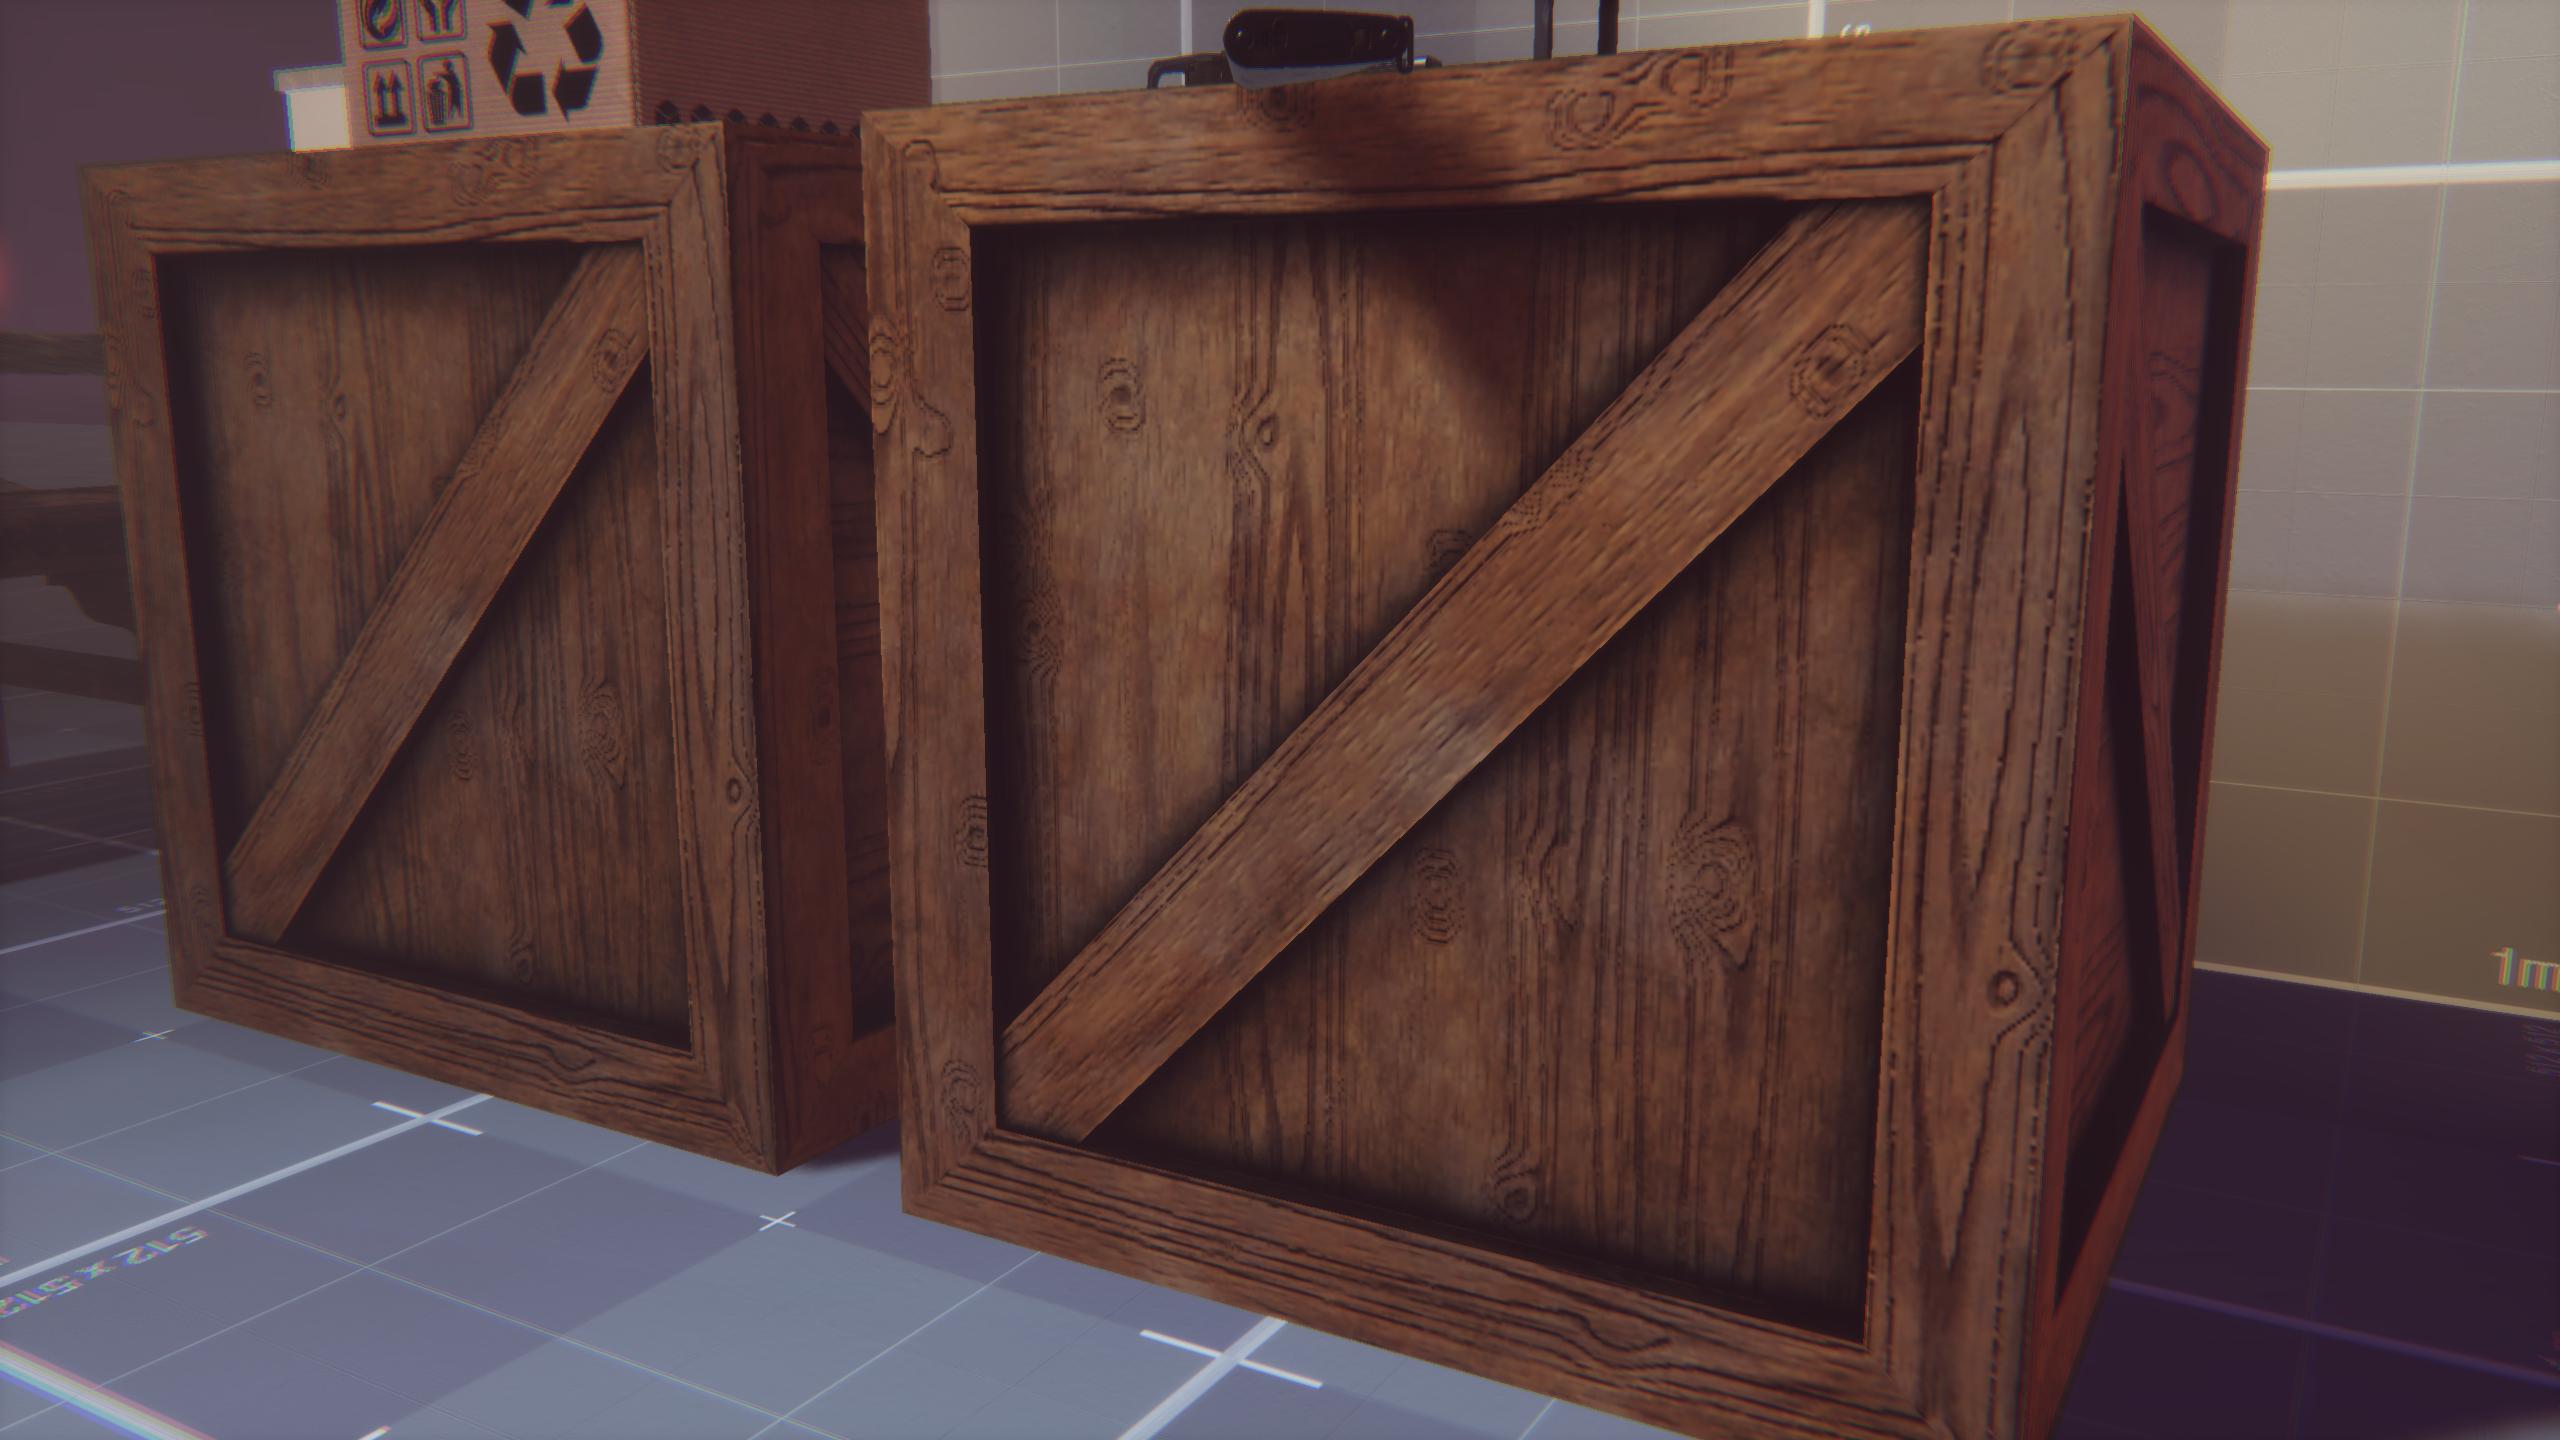 Crate with defined ambient occlusion